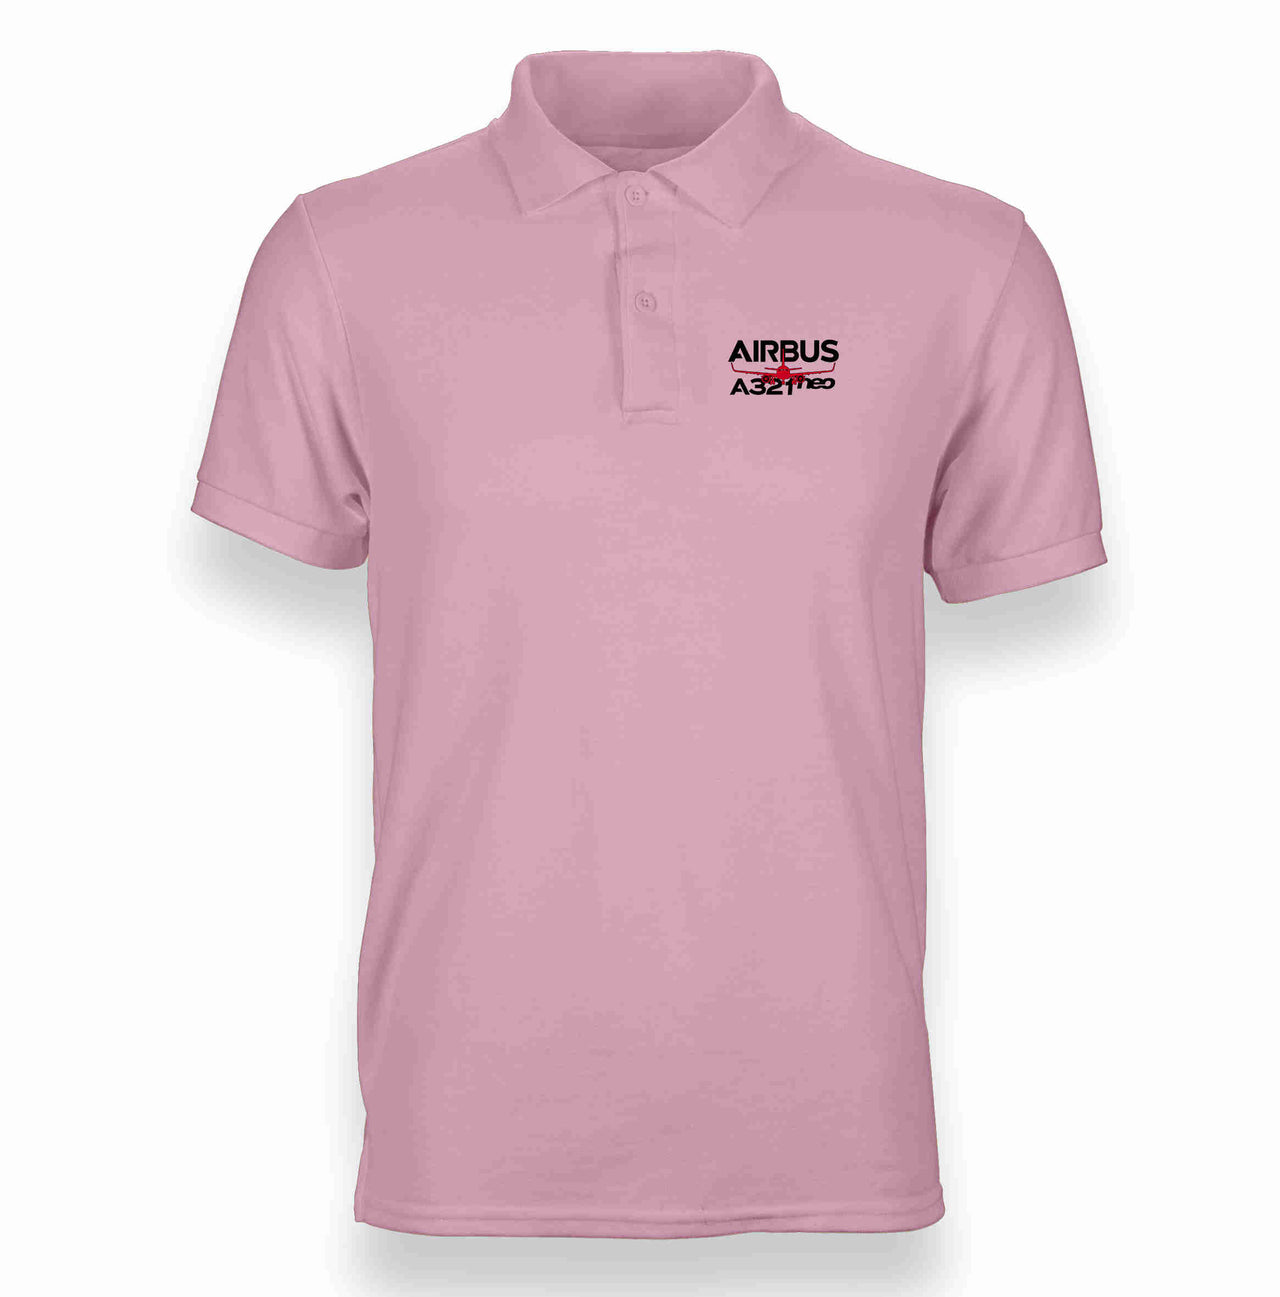 Amazing Airbus A321neo Designed "WOMEN" Polo T-Shirts